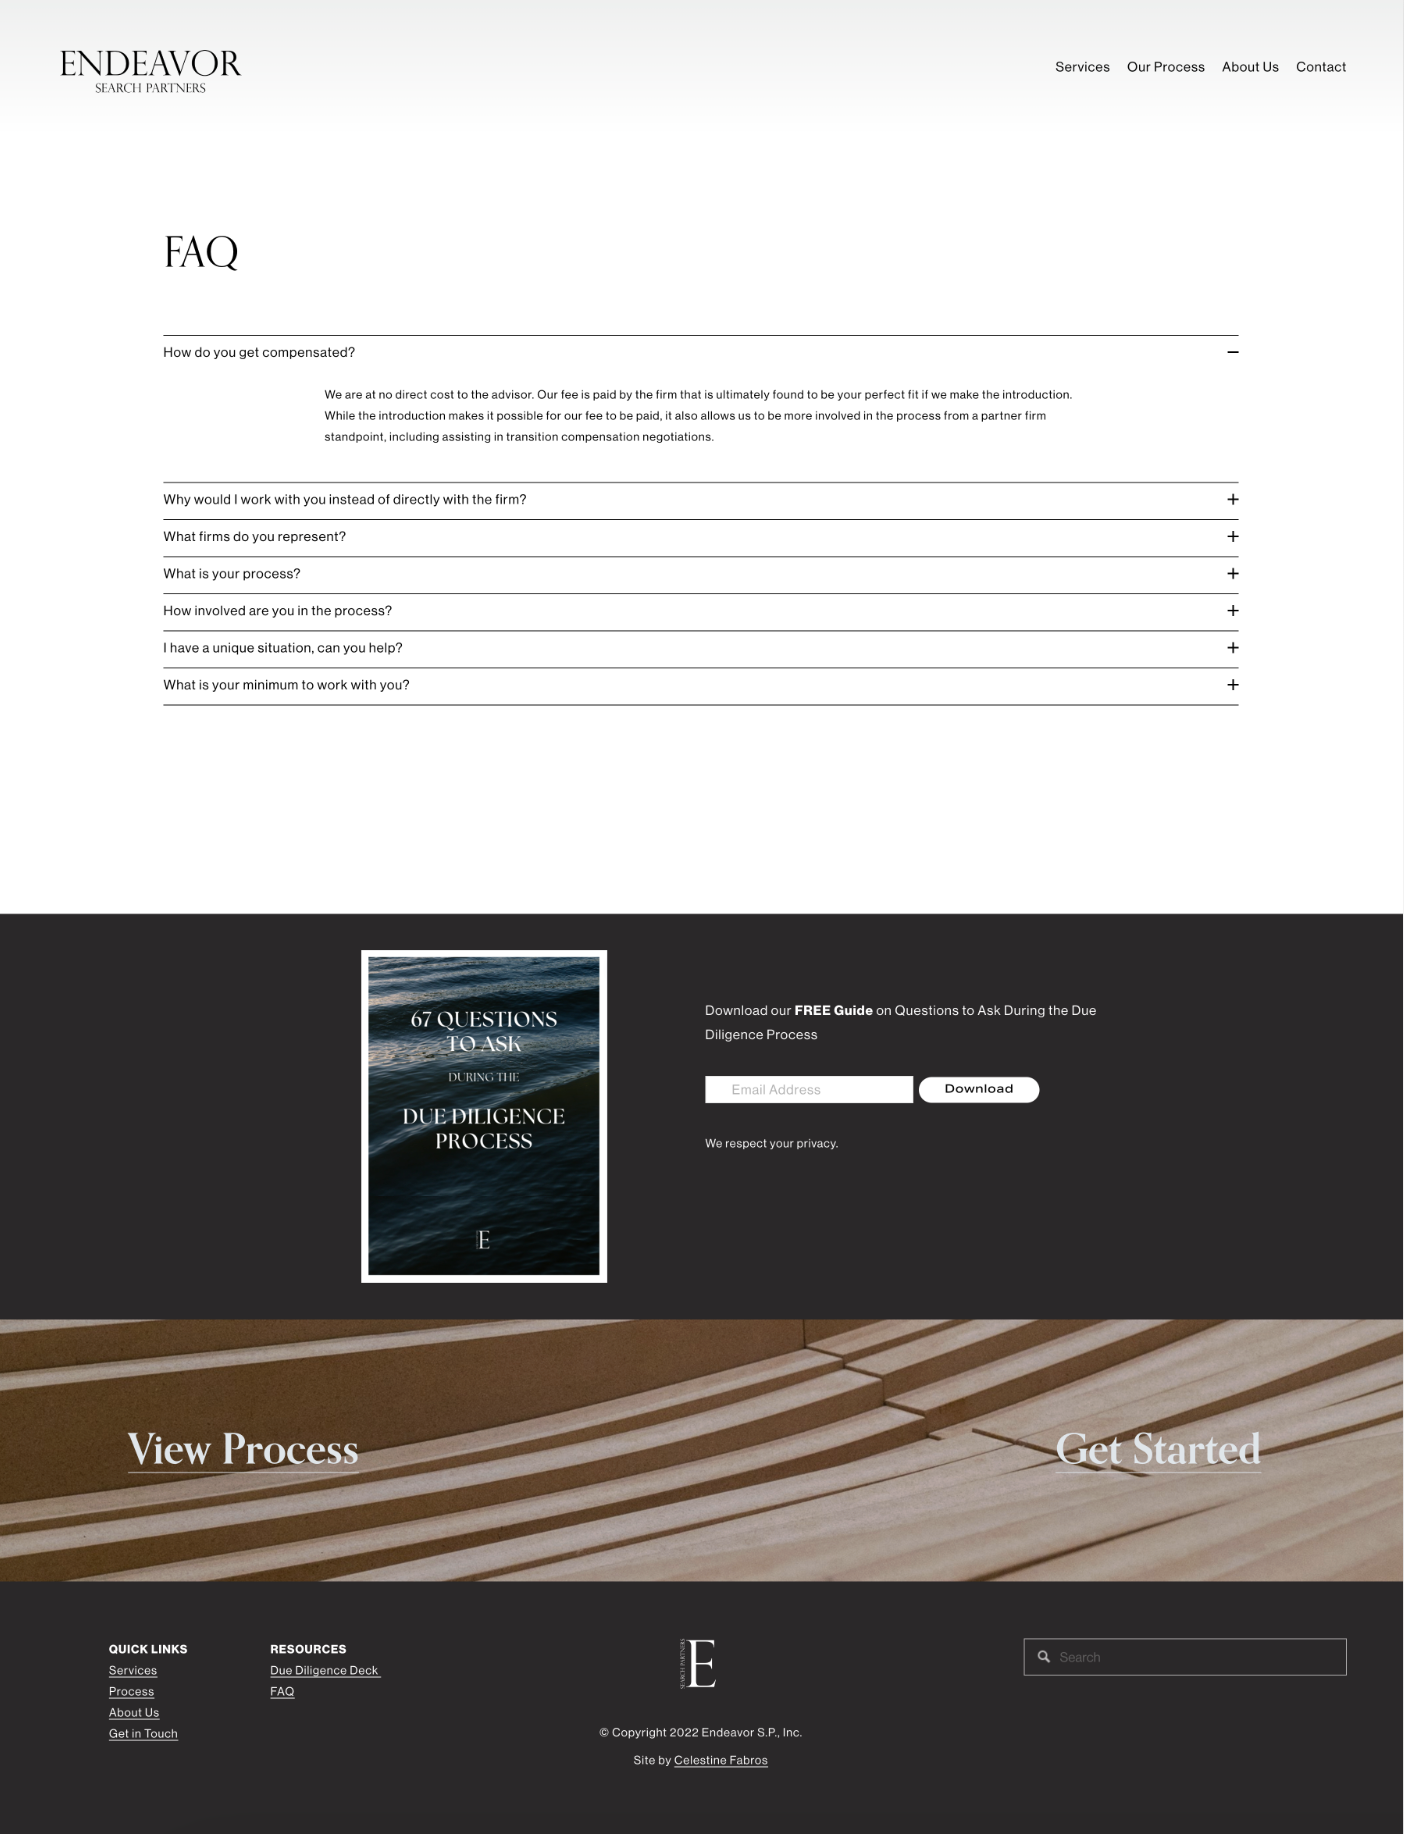 endeavor-search-partners-faq-page-web-design-development-and-design-direction-by-celestine-fabros.png